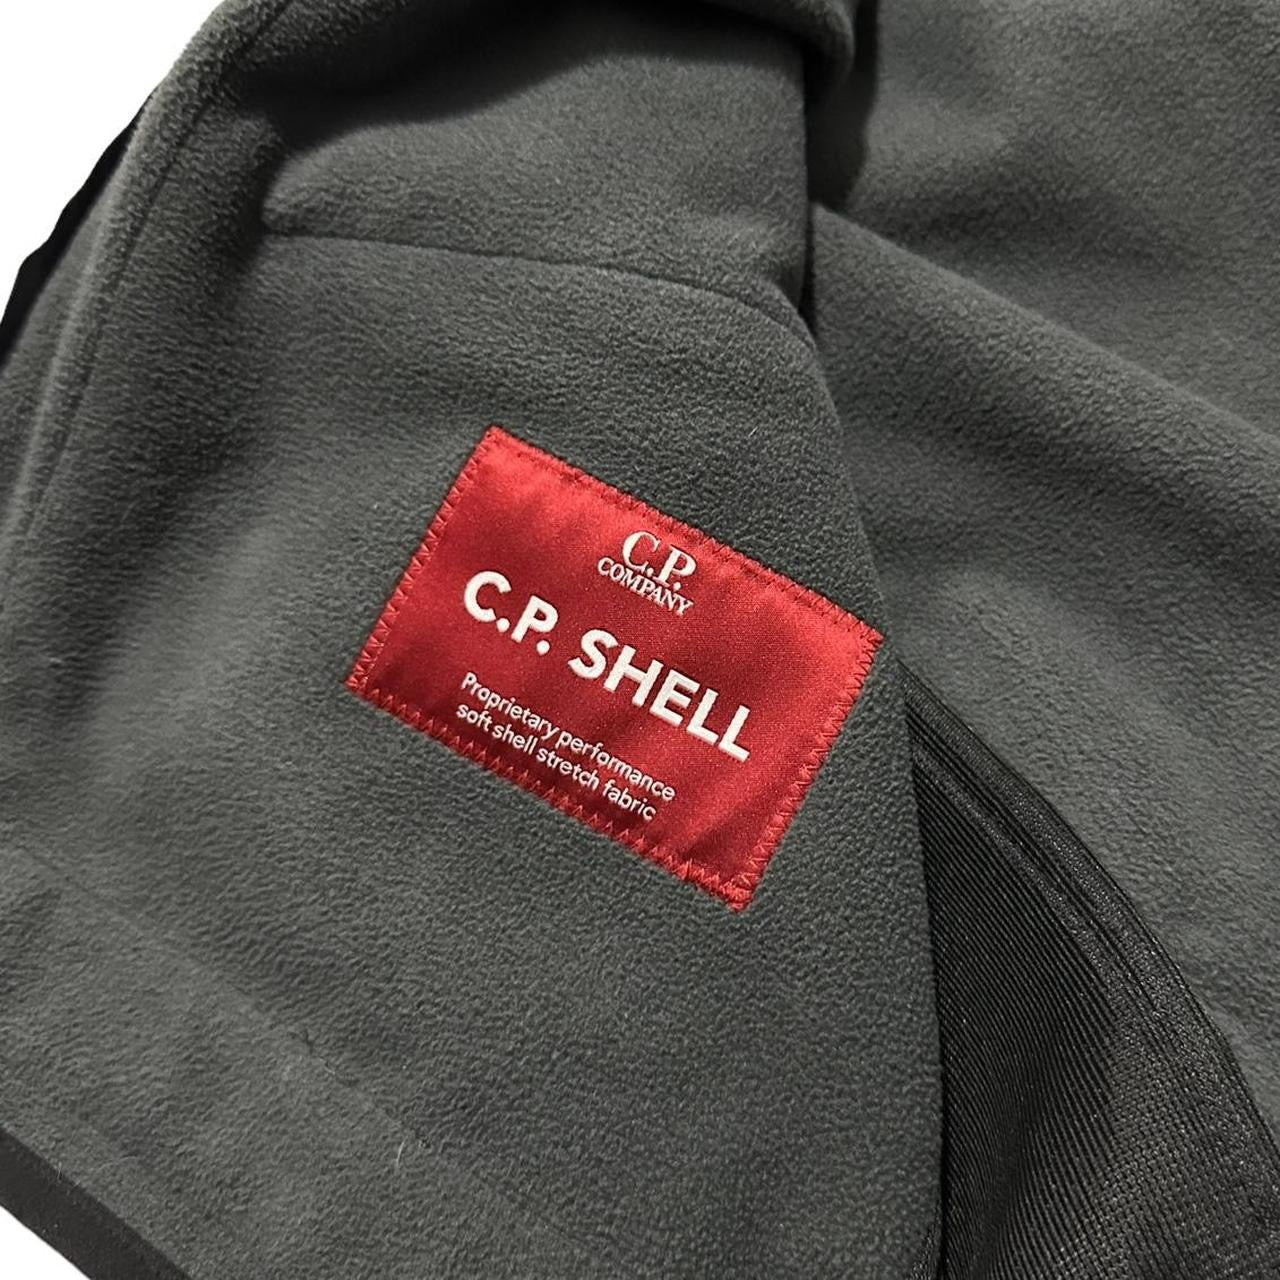 CP Company Multipocket Vest